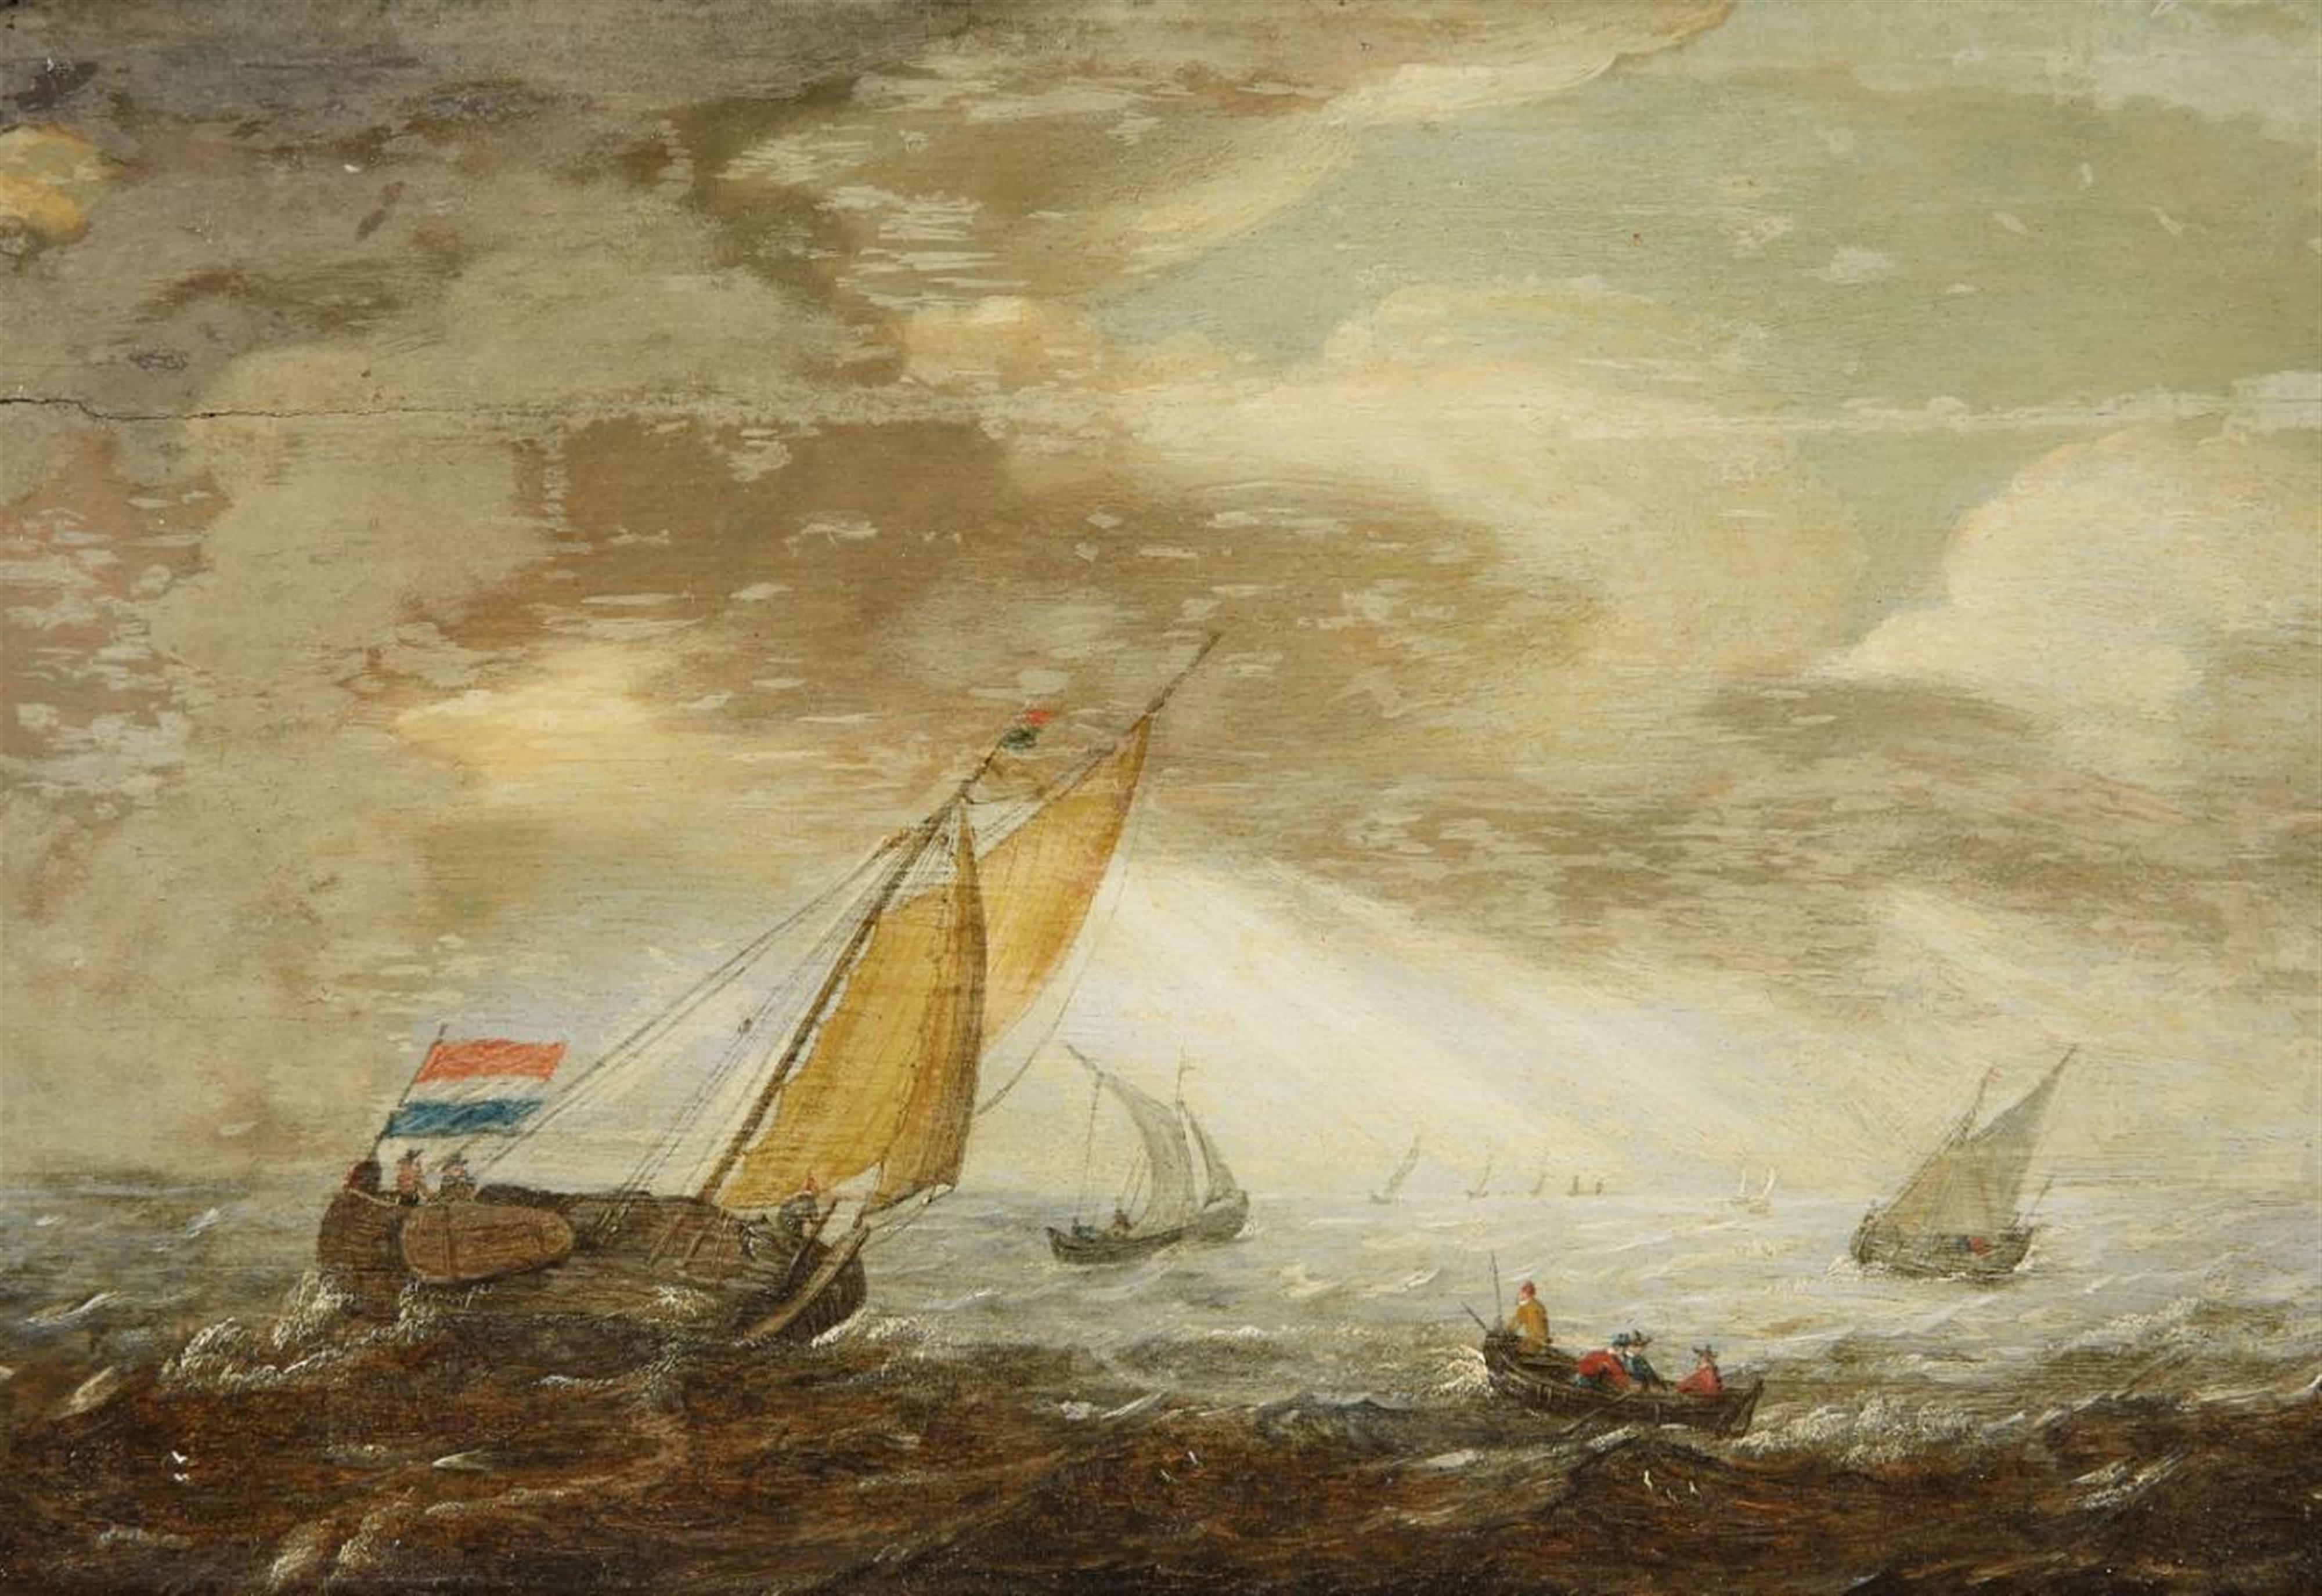 Dutch School of the 17th century - SHIPS ON A ROUGH SEA - image-1